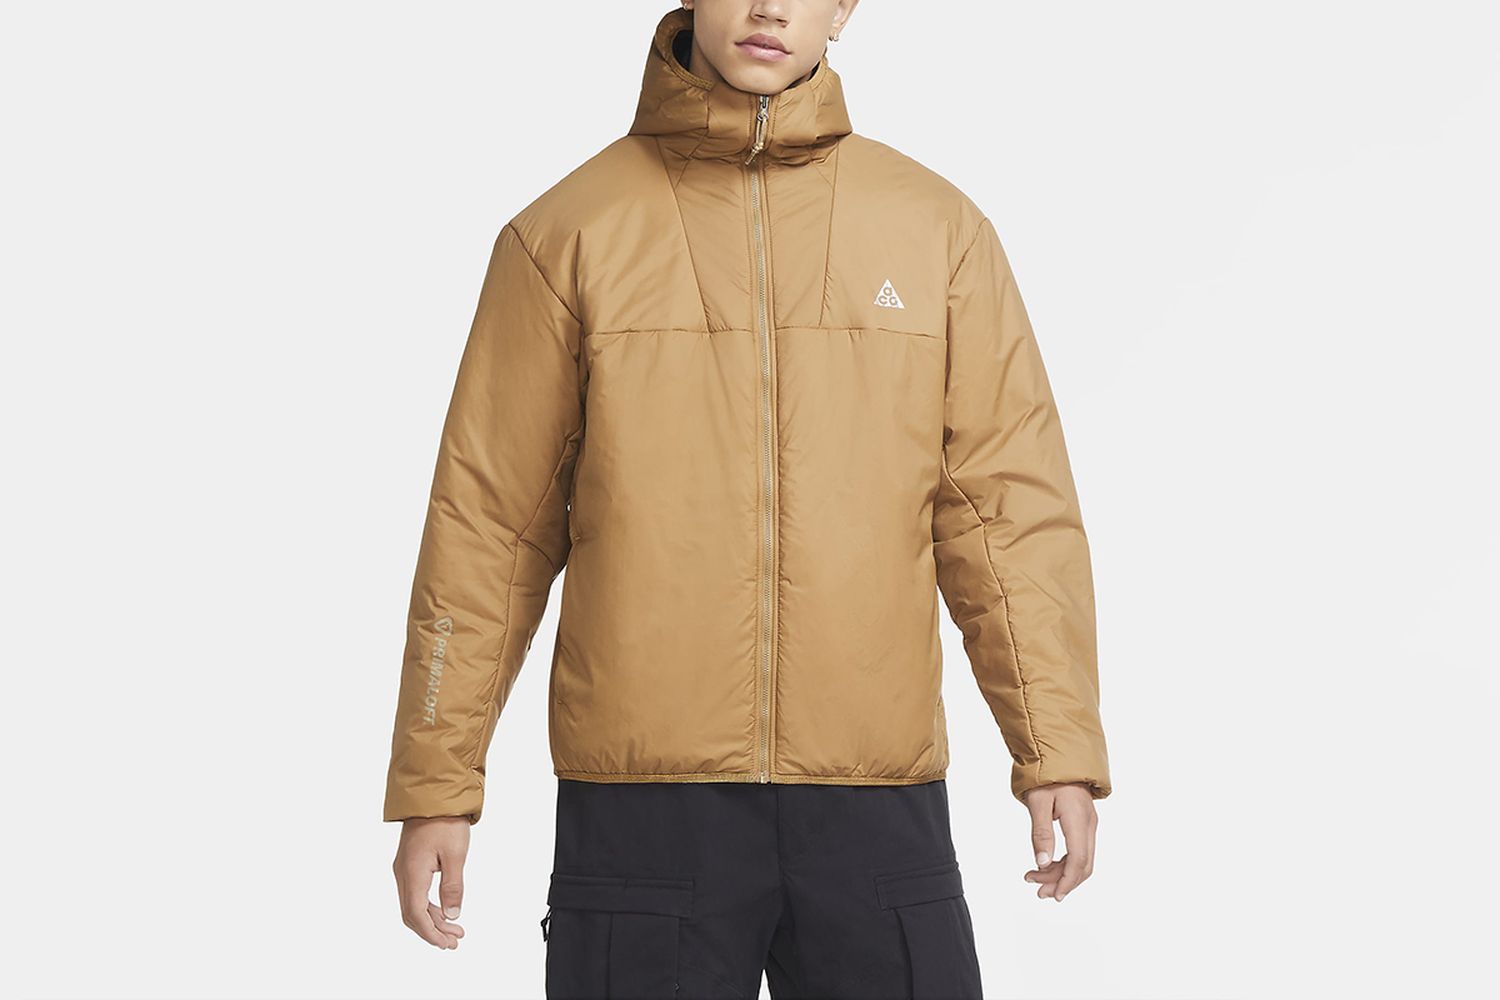 ACG Packable Insulated Jacket "Rope de Dope"